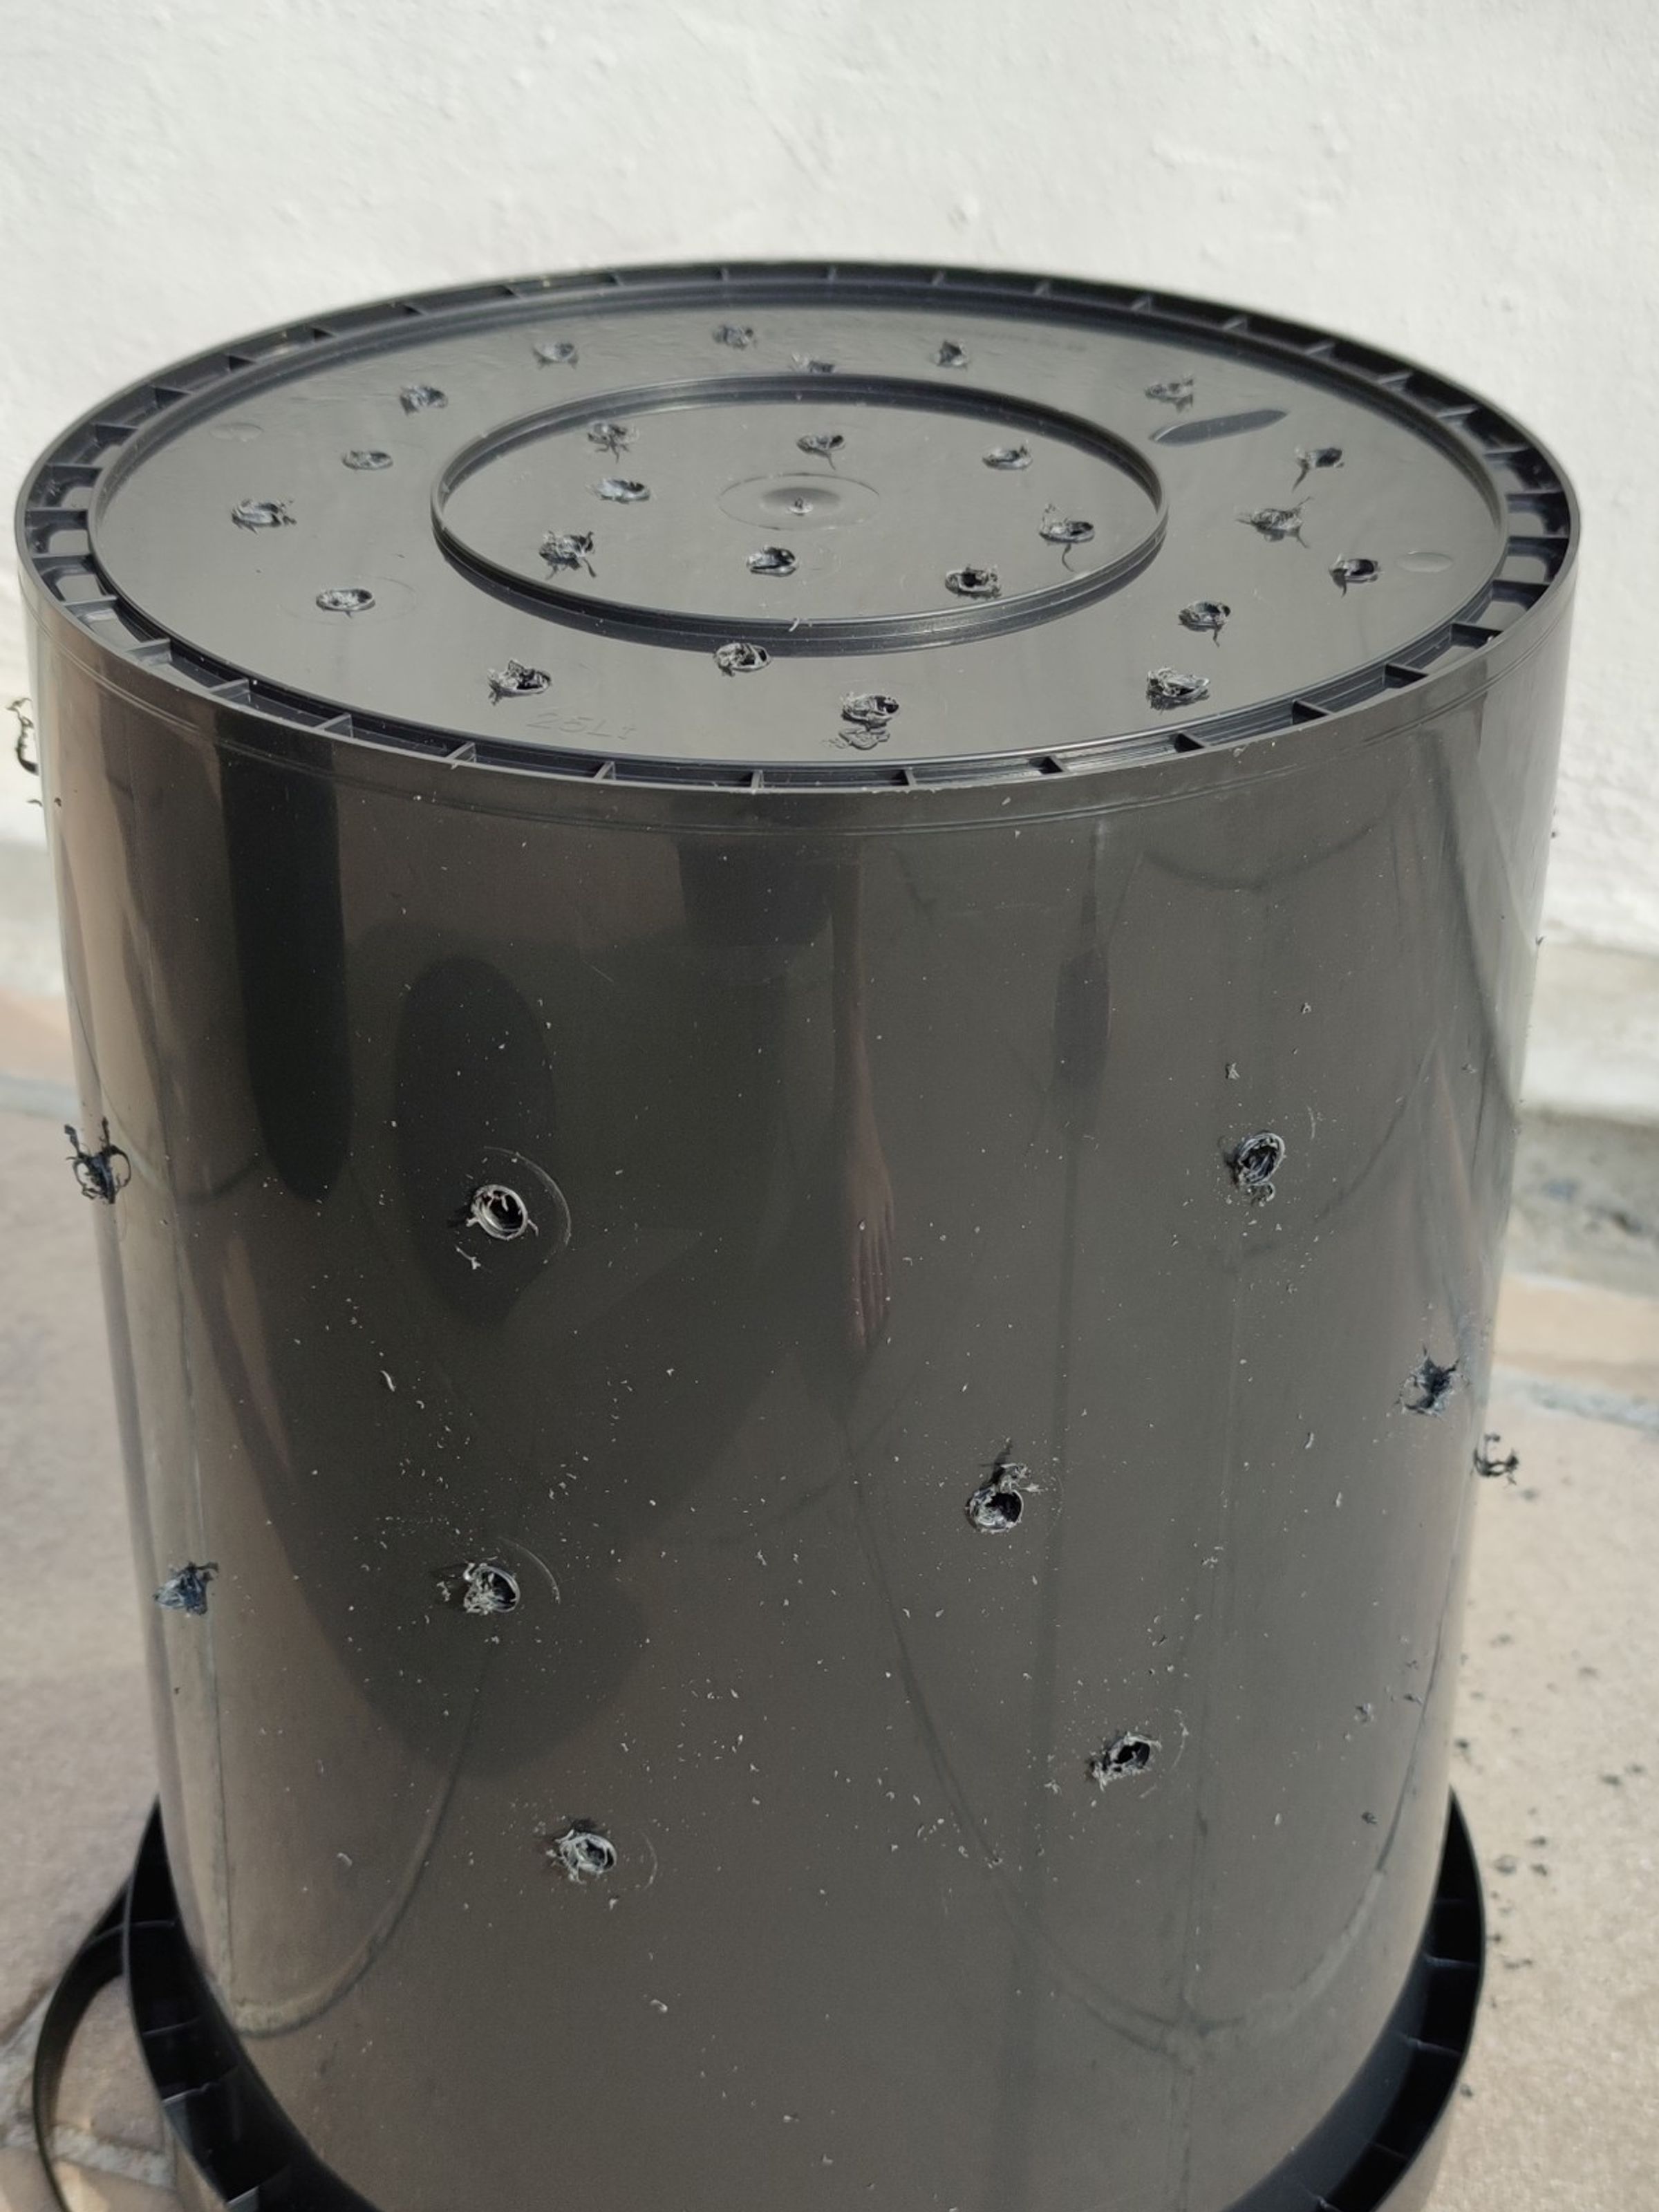 Holes in the inner bucket (here they have been drilled)